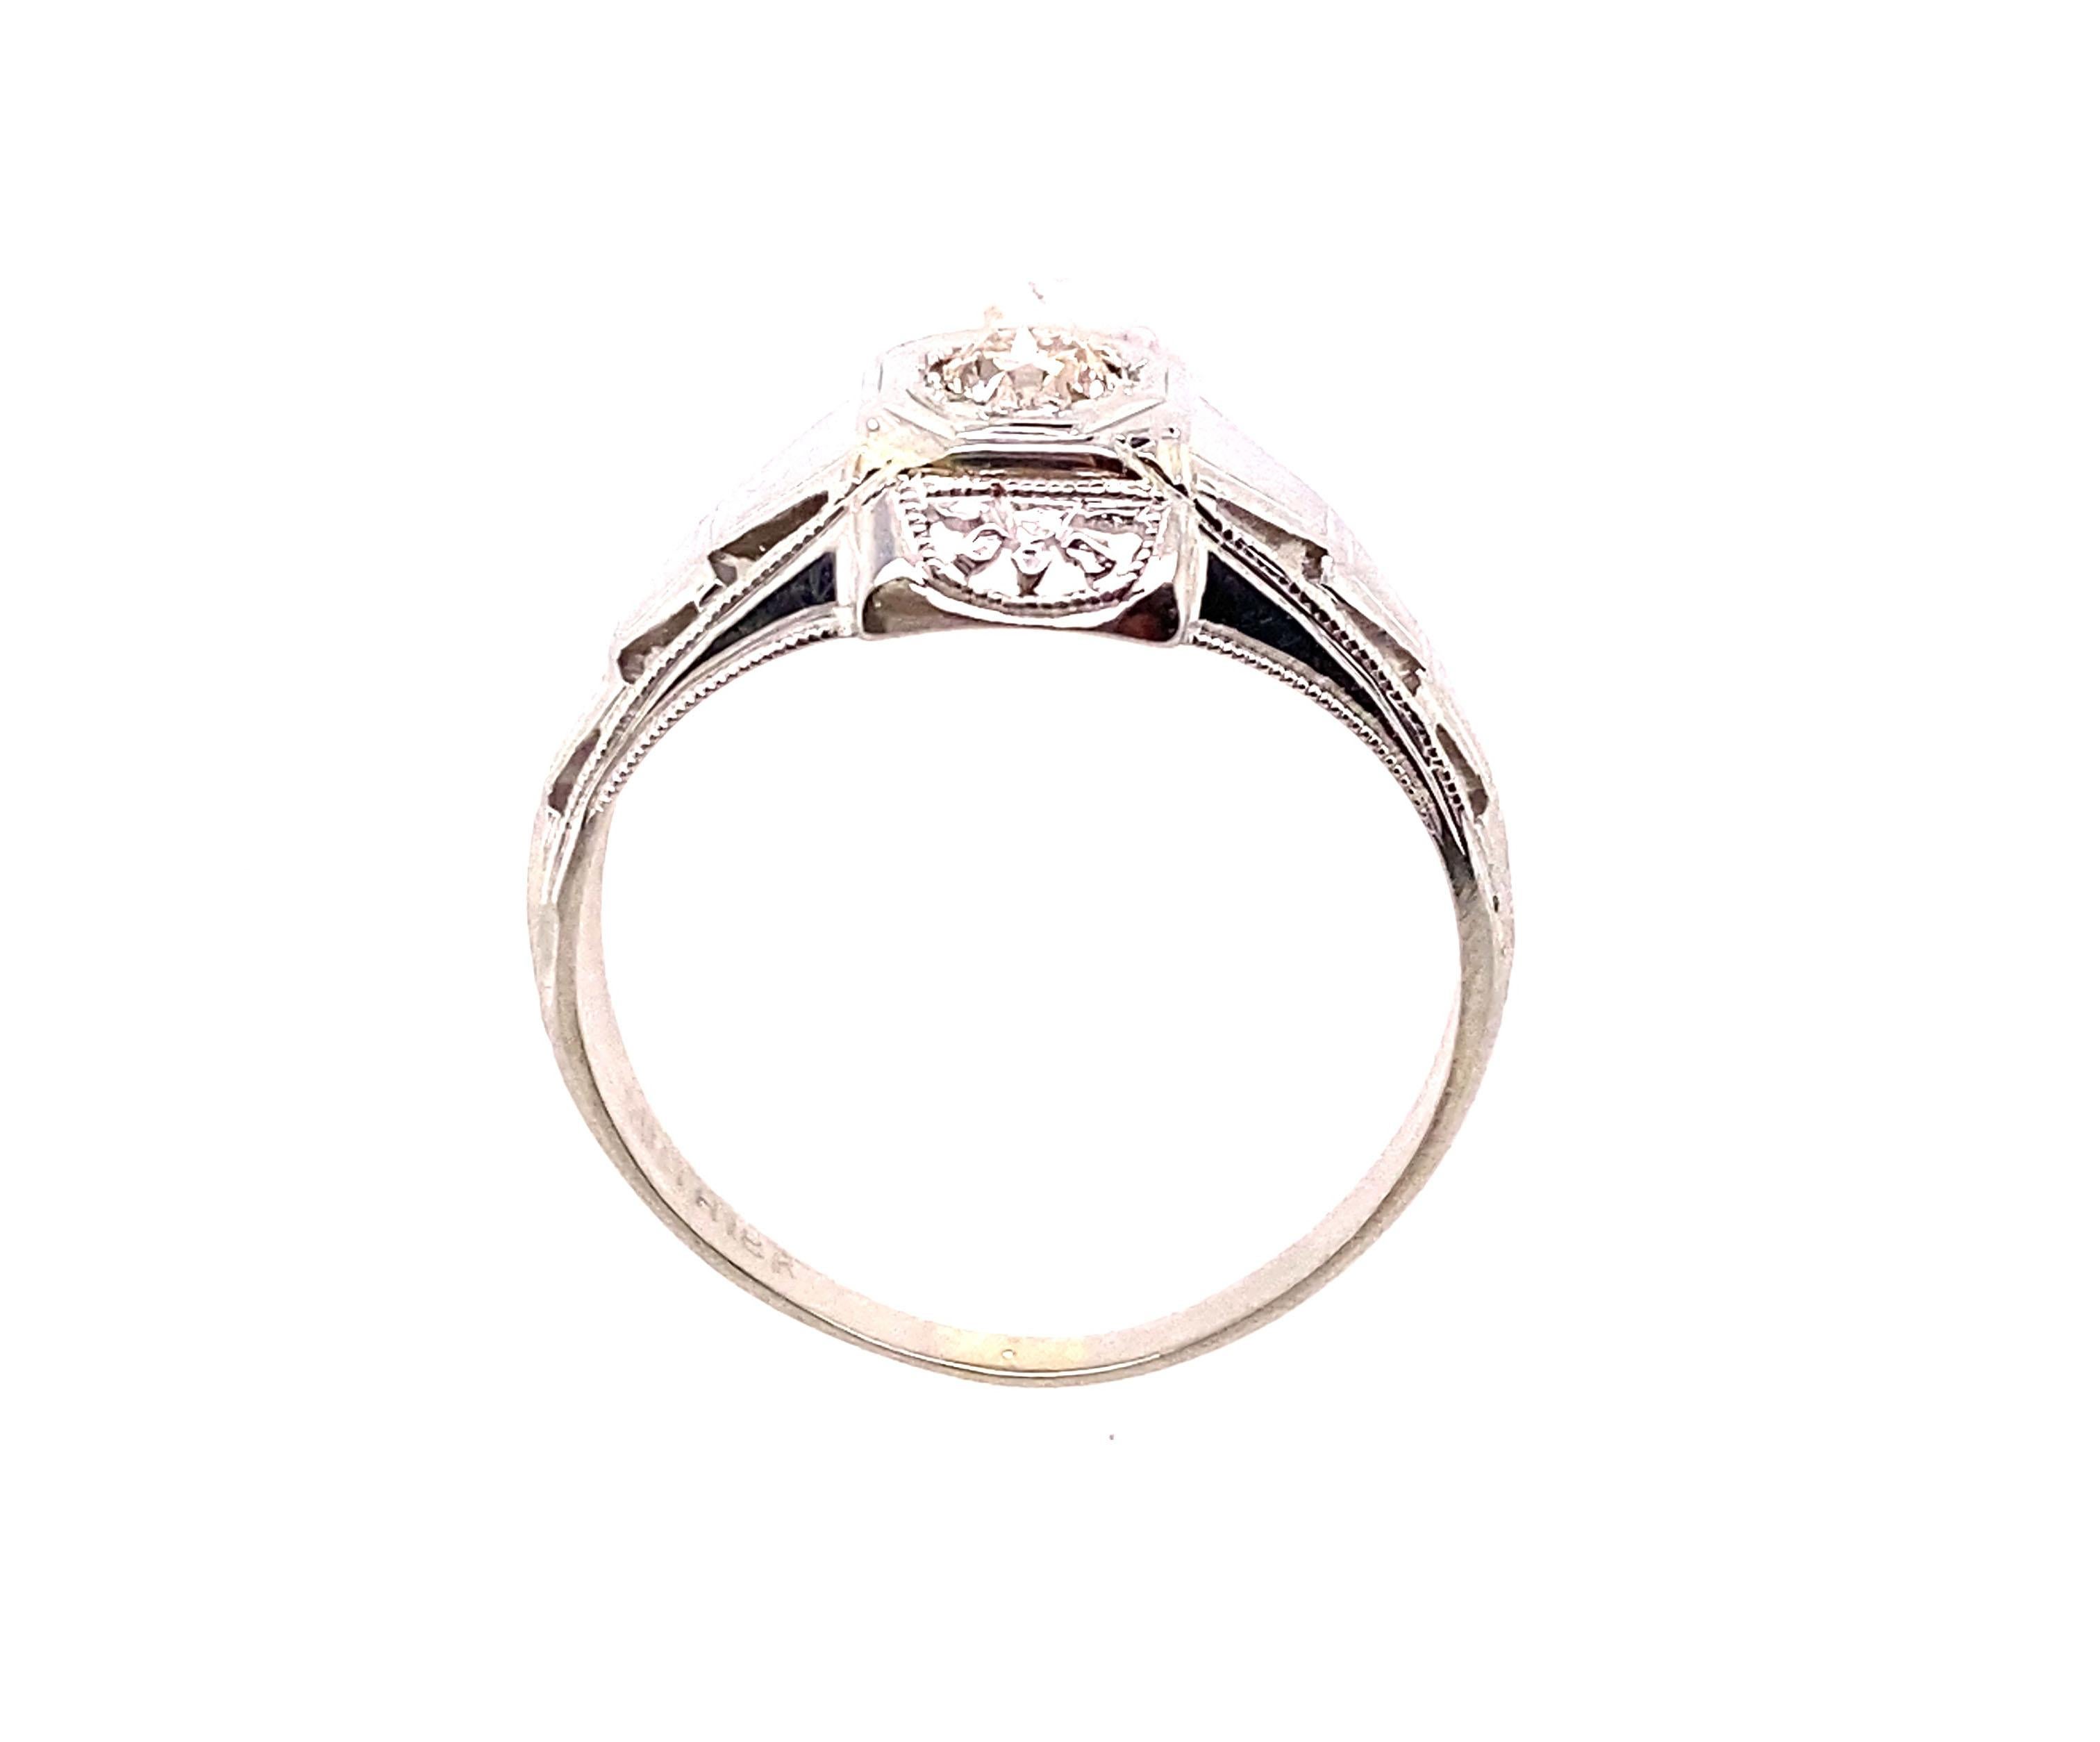 Genuine Original Art Deco Antique from 1930's Solitaire Engagement Ring .12ct Old European Cut Diamond 18K


Featuring a Gorgeous Genuine .12ct H-I/VS Natural Mined Old European Cut Diamond Center

Delicate Milgrain

Hand Carved Details

Trademarked